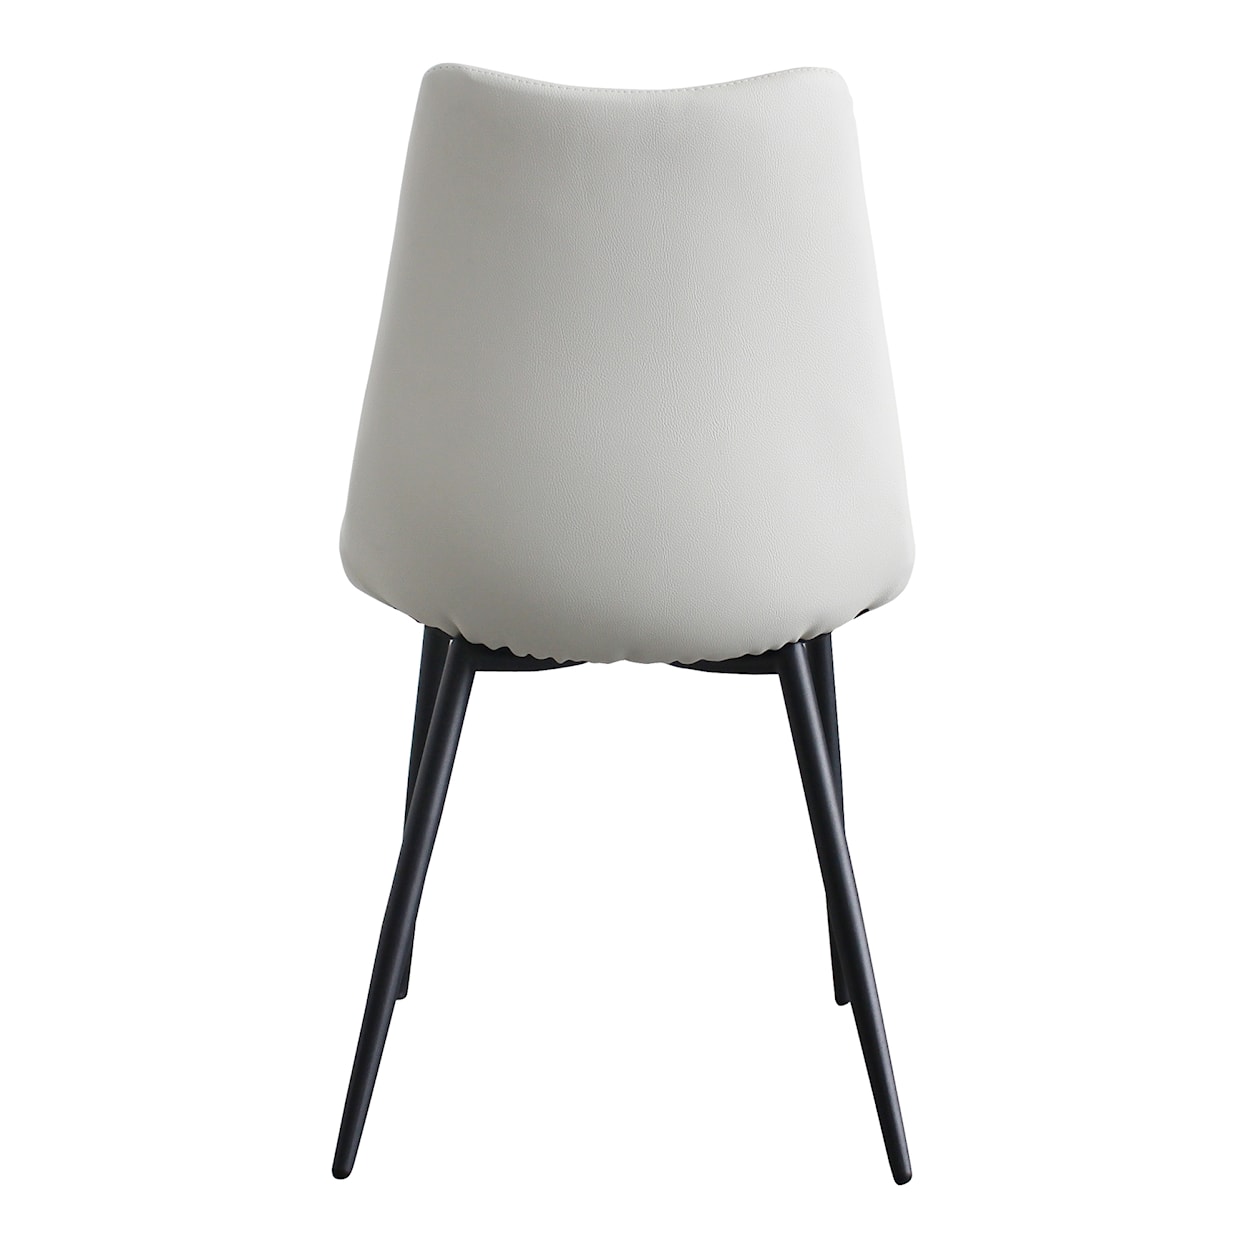 Moe's Home Collection Alibi Alibi Dining Chair Ivory-M2